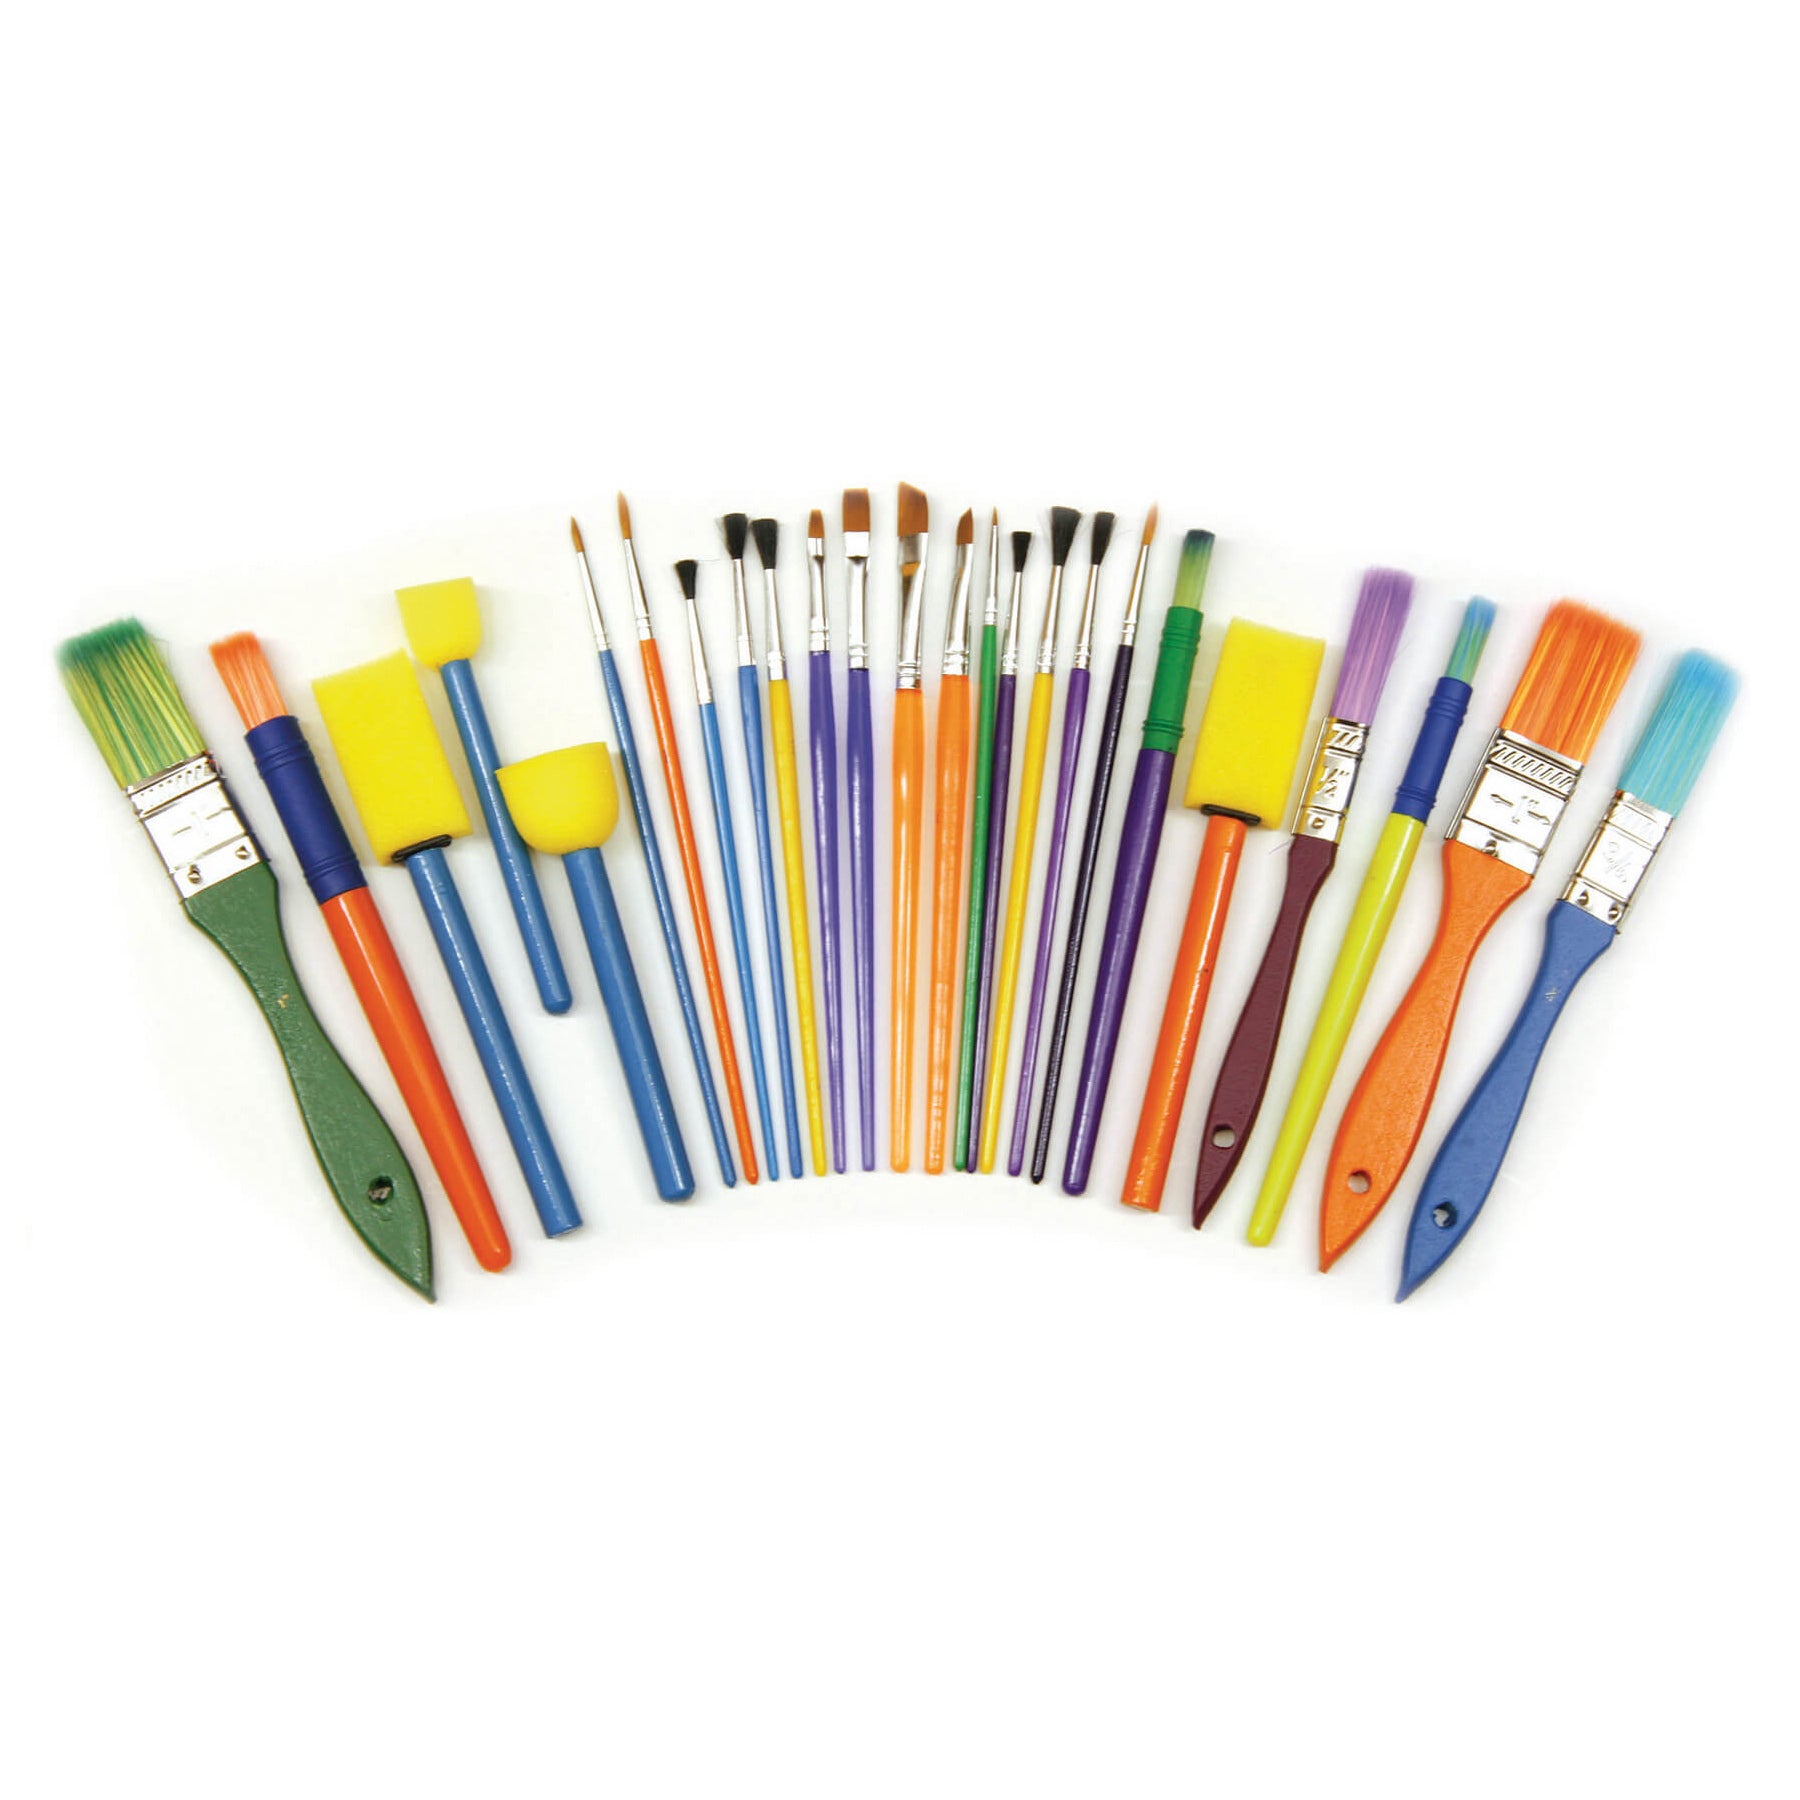 Starter Brush Assortment, Assorted Colors & Sizes, 25 Brushes Per Pack, 2 Packs - A1 School Supplies